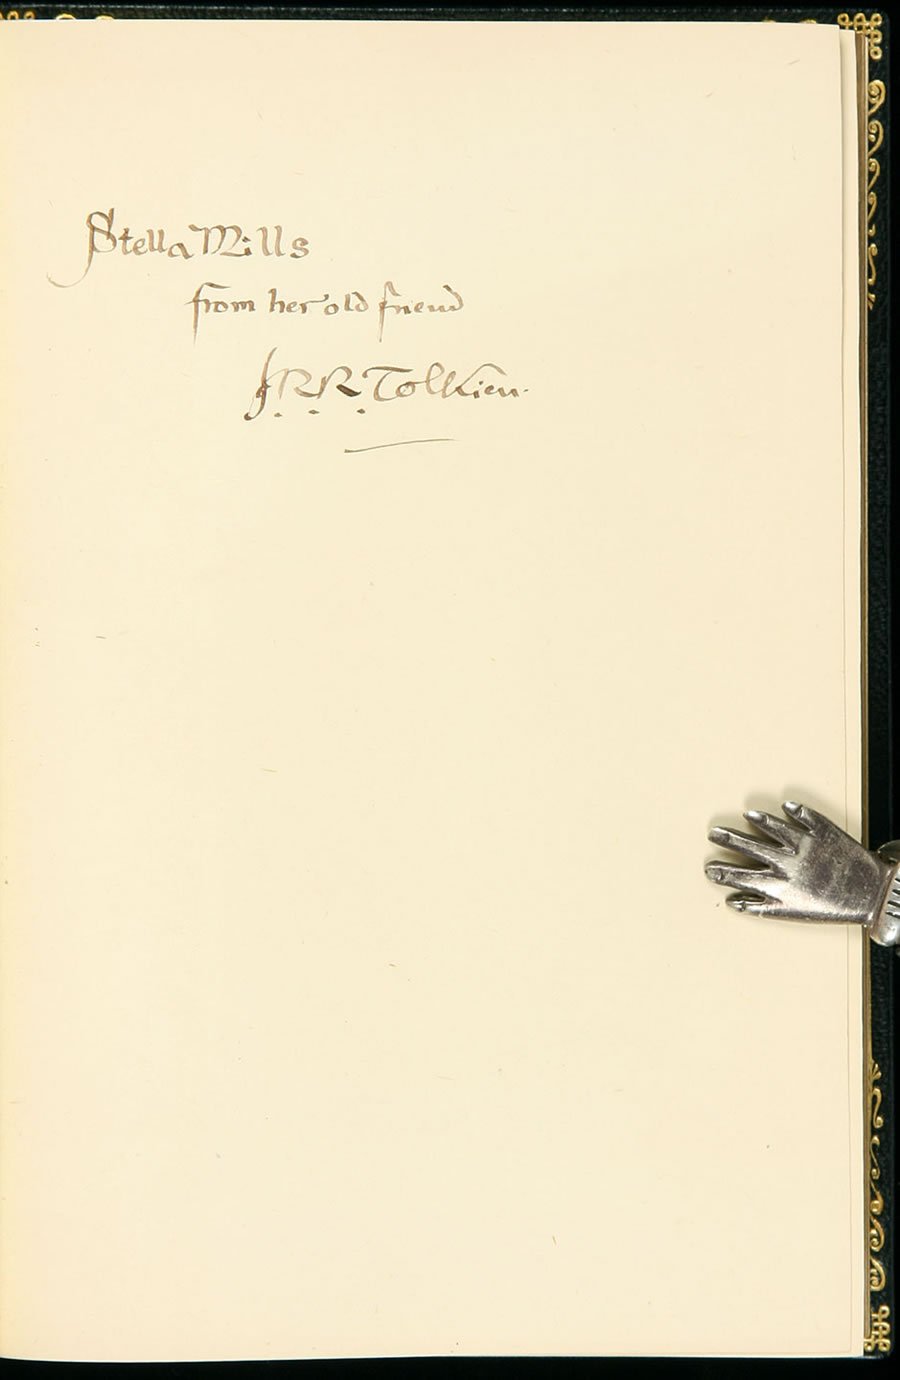 an association copy of The Hobbit that was inscribed by the author on the front flyleaf with "To Stella Mills, from her old friend, J.R.R. Tolkien."